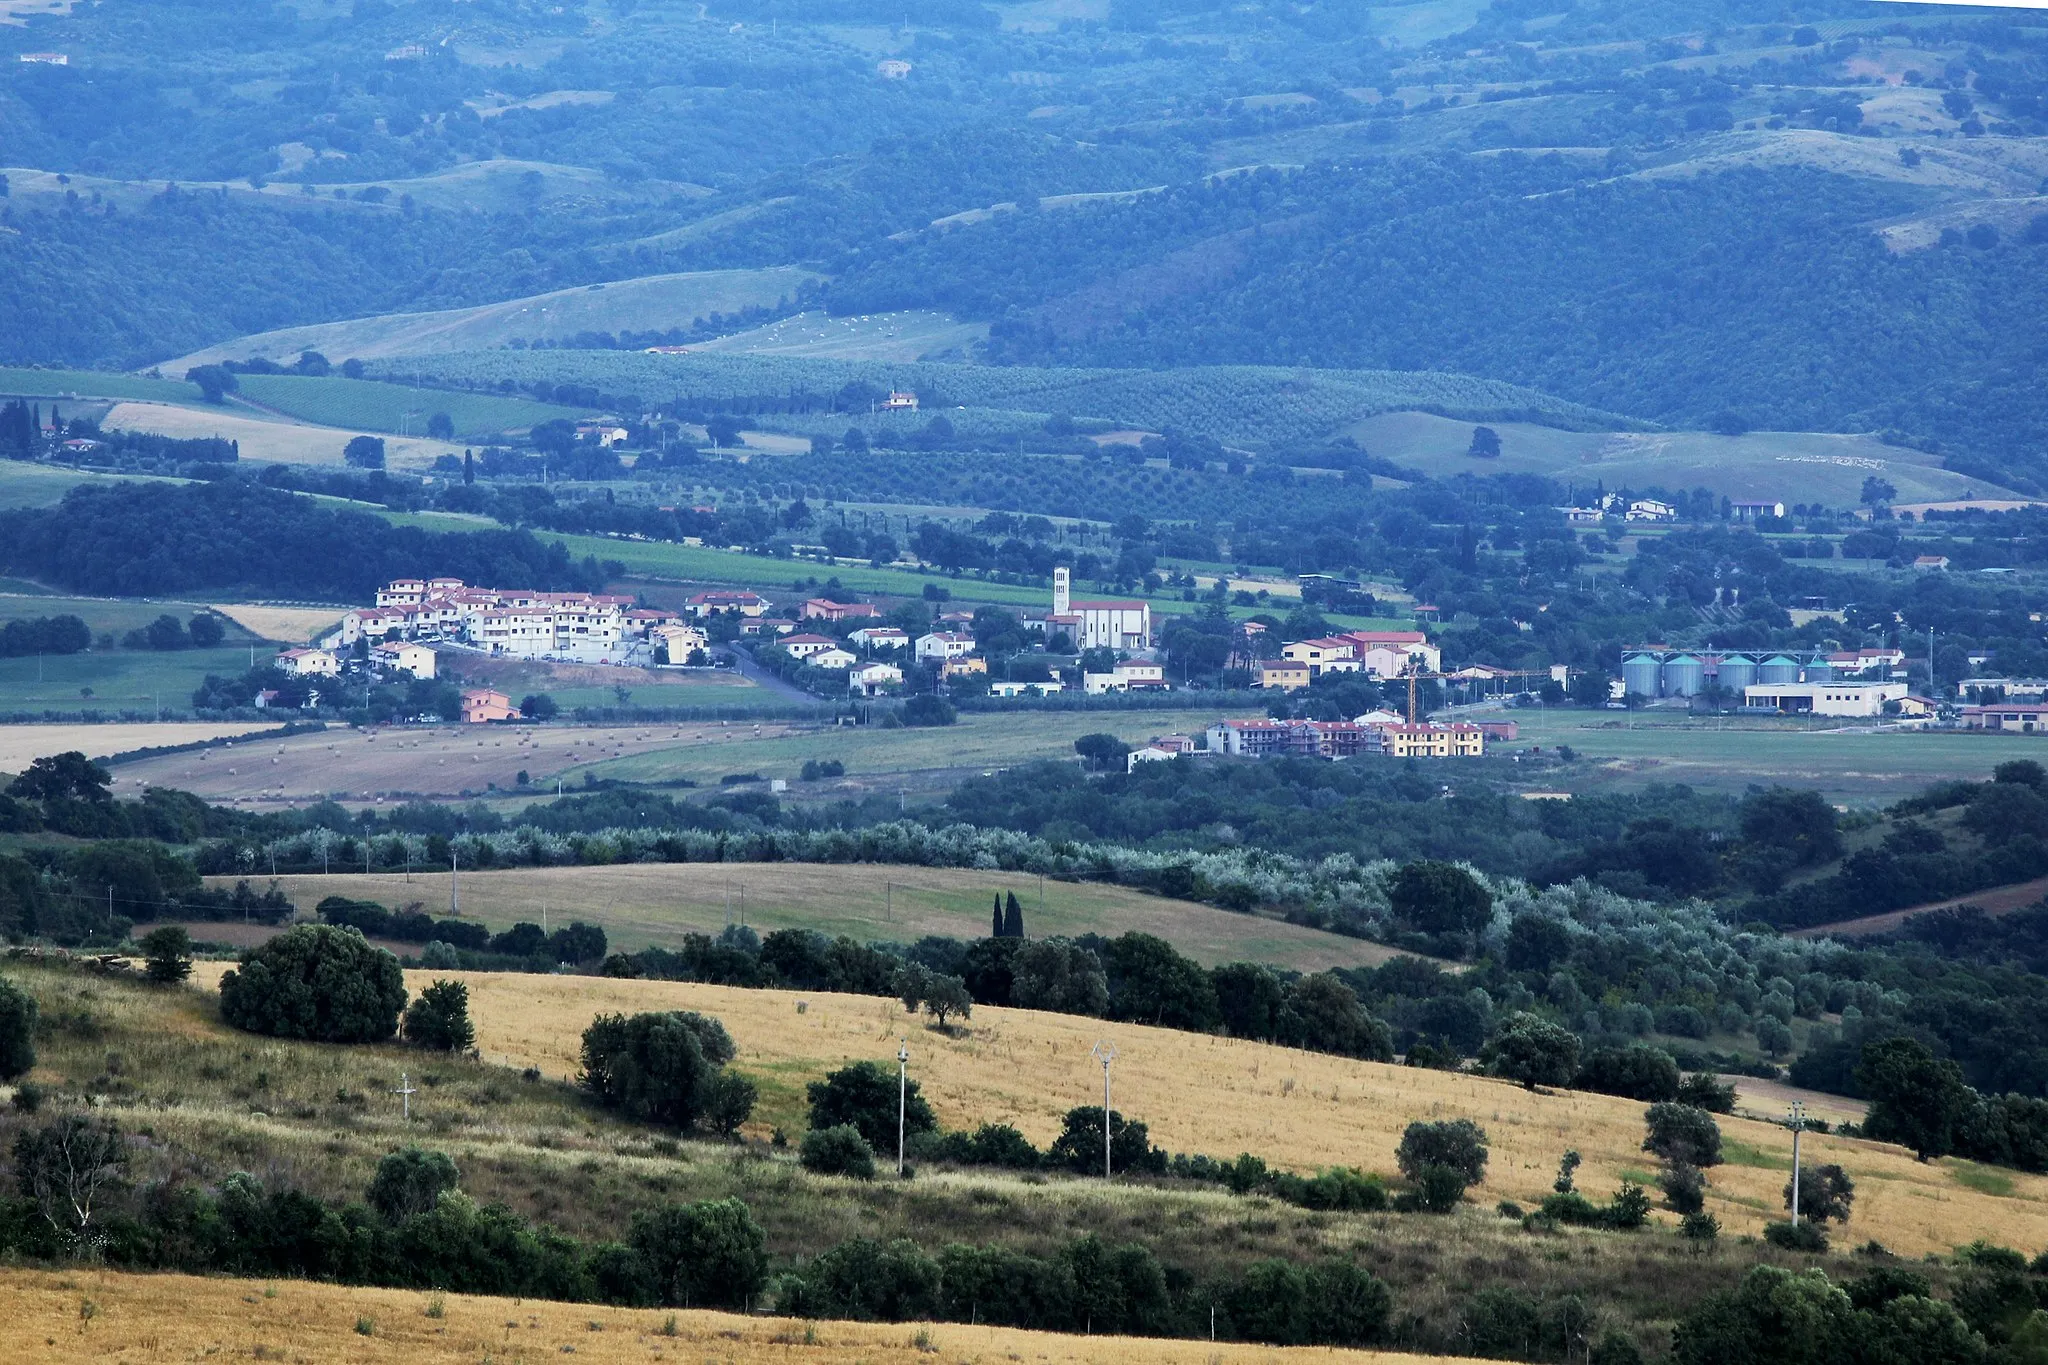 Photo showing: View of Arcille, a town in the Province of Grosseto, Tuscany